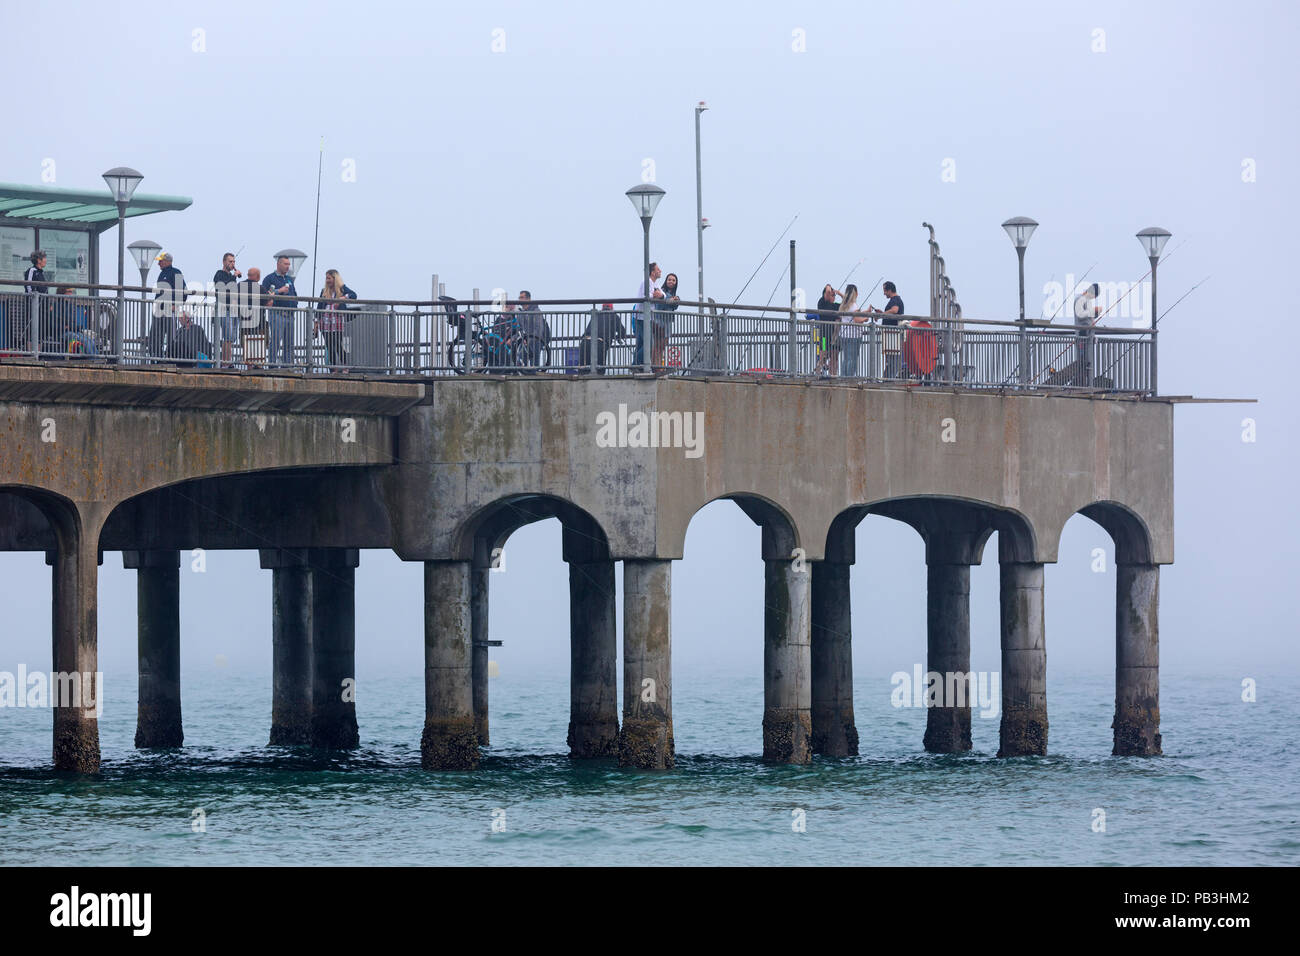 People on the end of the Boscombe Pier near Bournemouth in England. Stock Photo